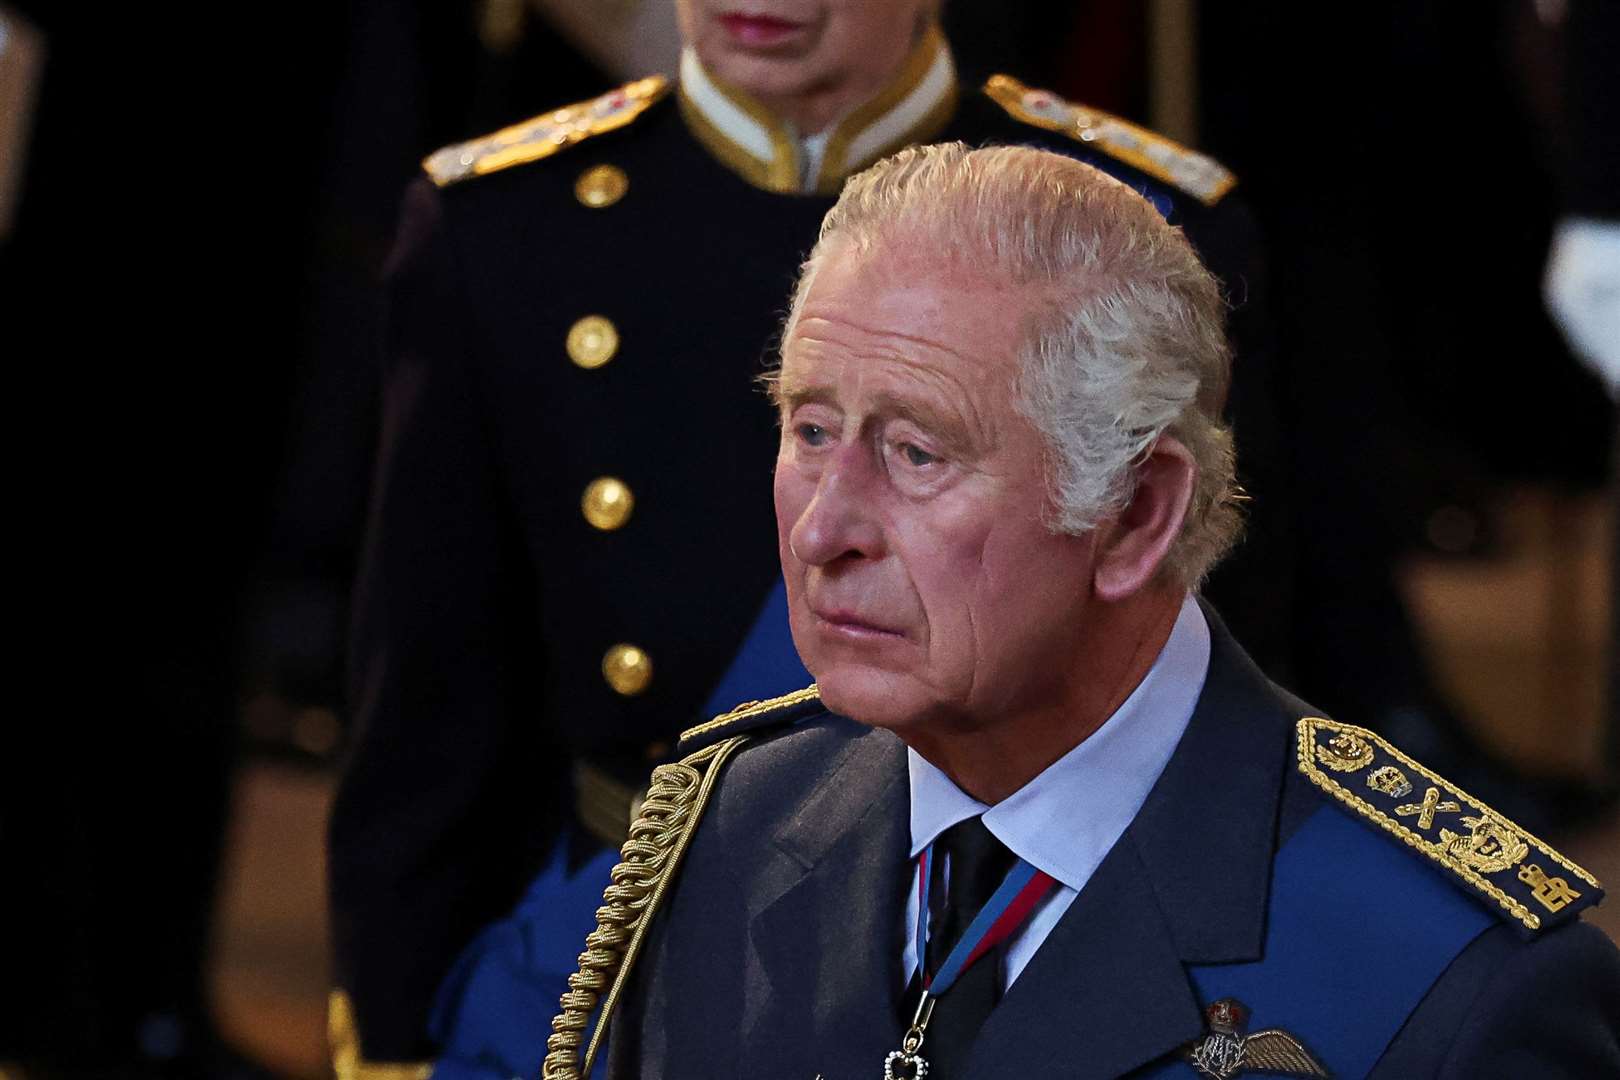 King Charles III arrives at Westminster Hall (Phil Noble/PA)